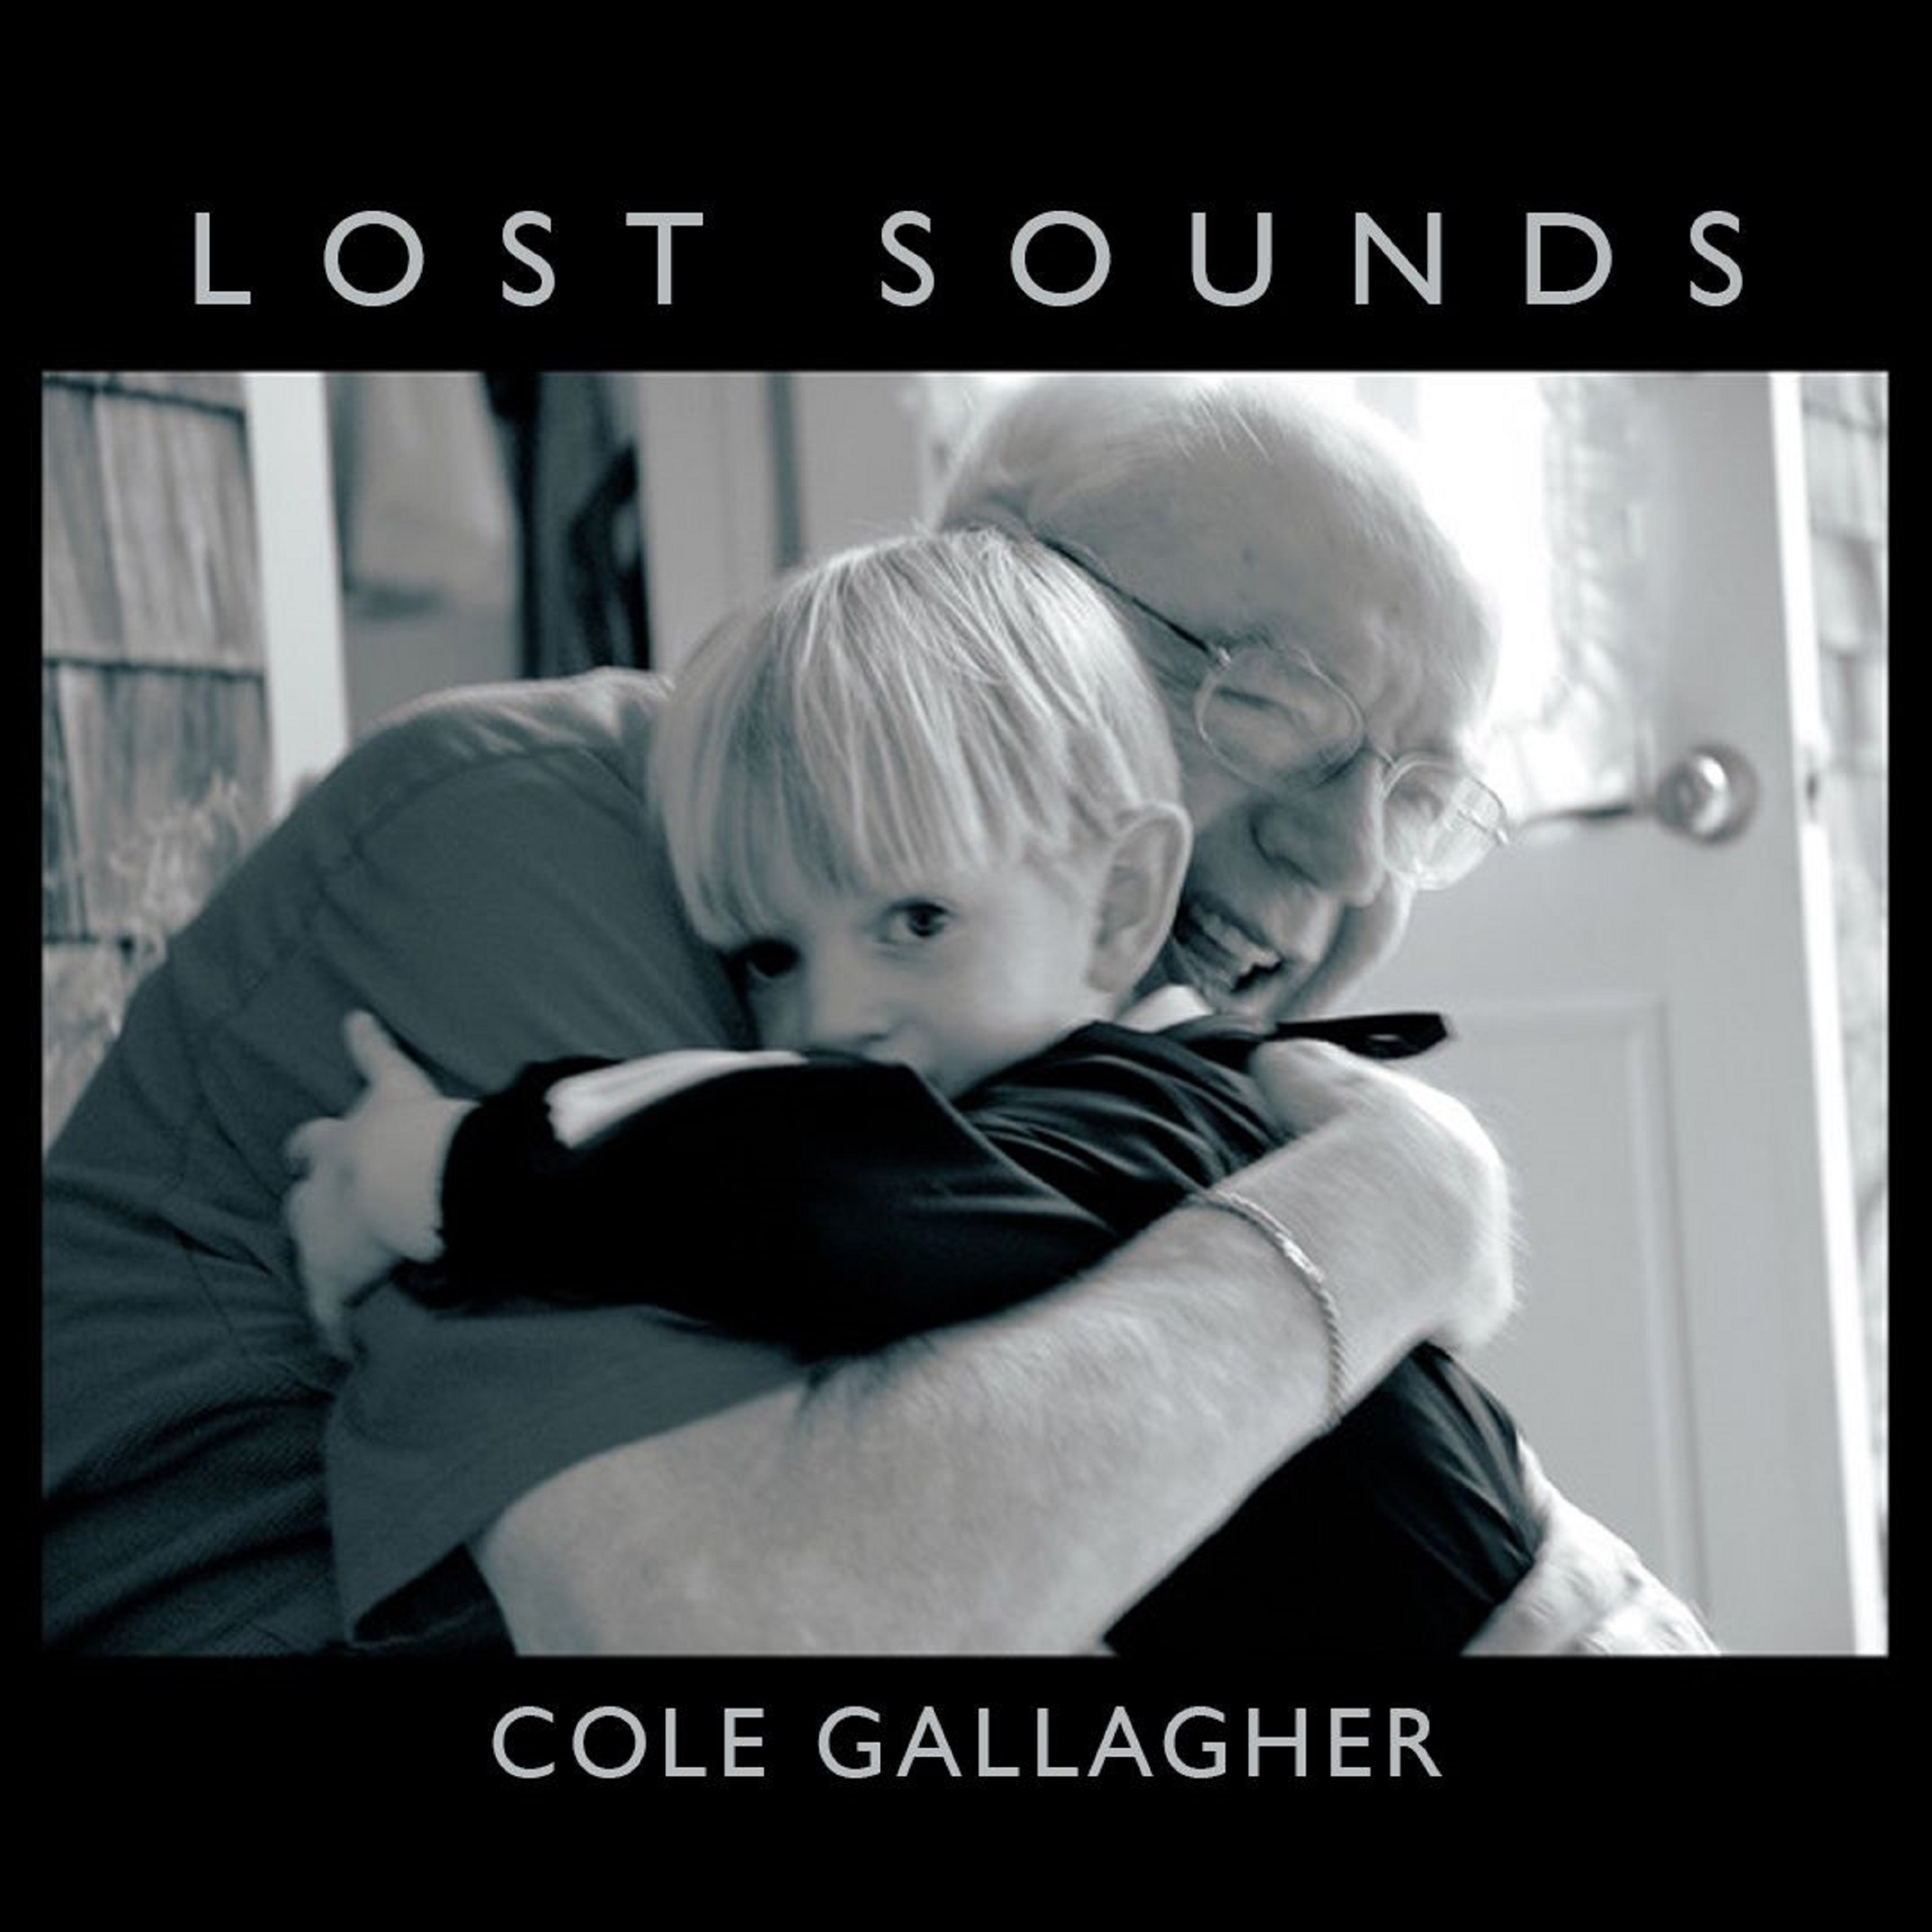 Singer/Songwriter Cole Gallagher Releases Tender New Single “Lost Sounds”